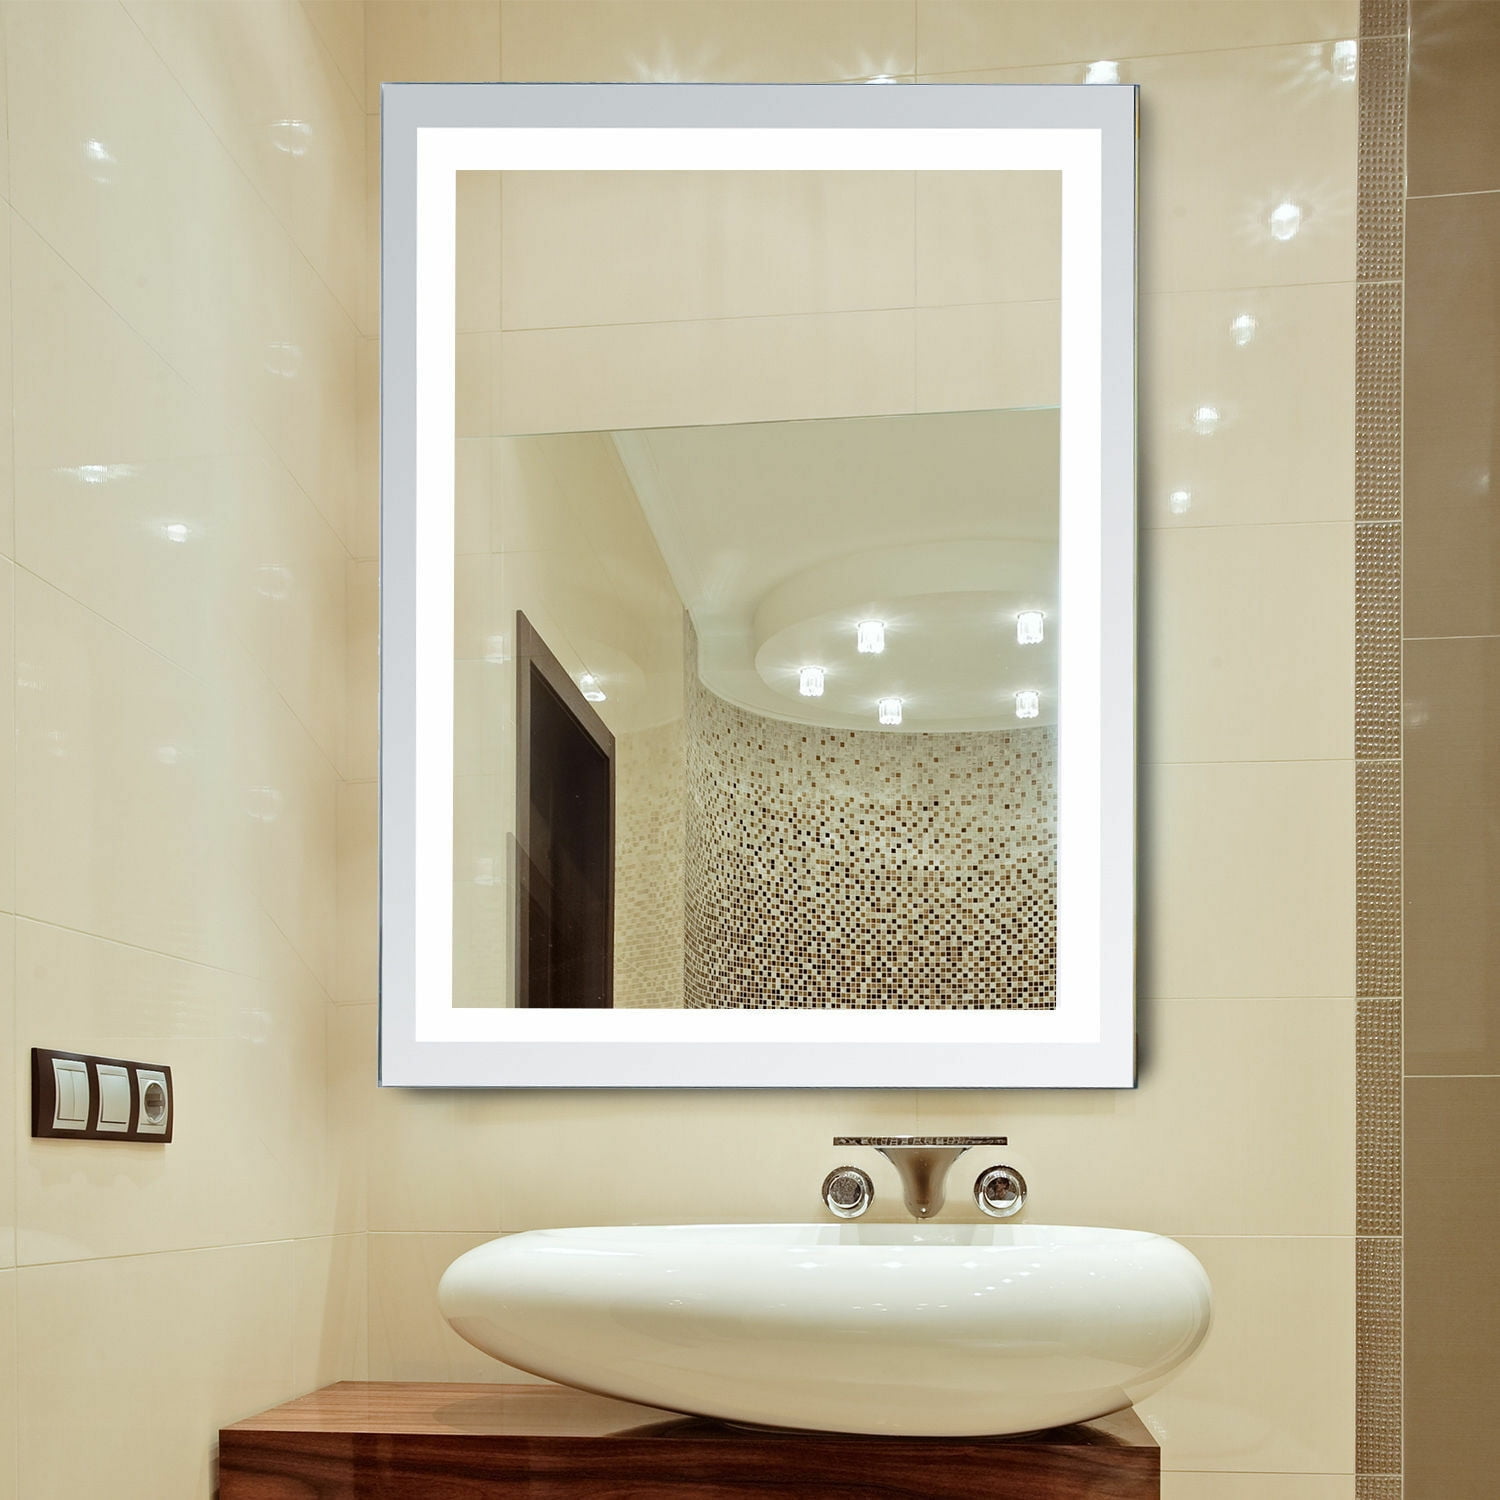 Details about   Illuminated Bathroom Mirror with Backlit LED Lights Wall Mounted Battery Powered 